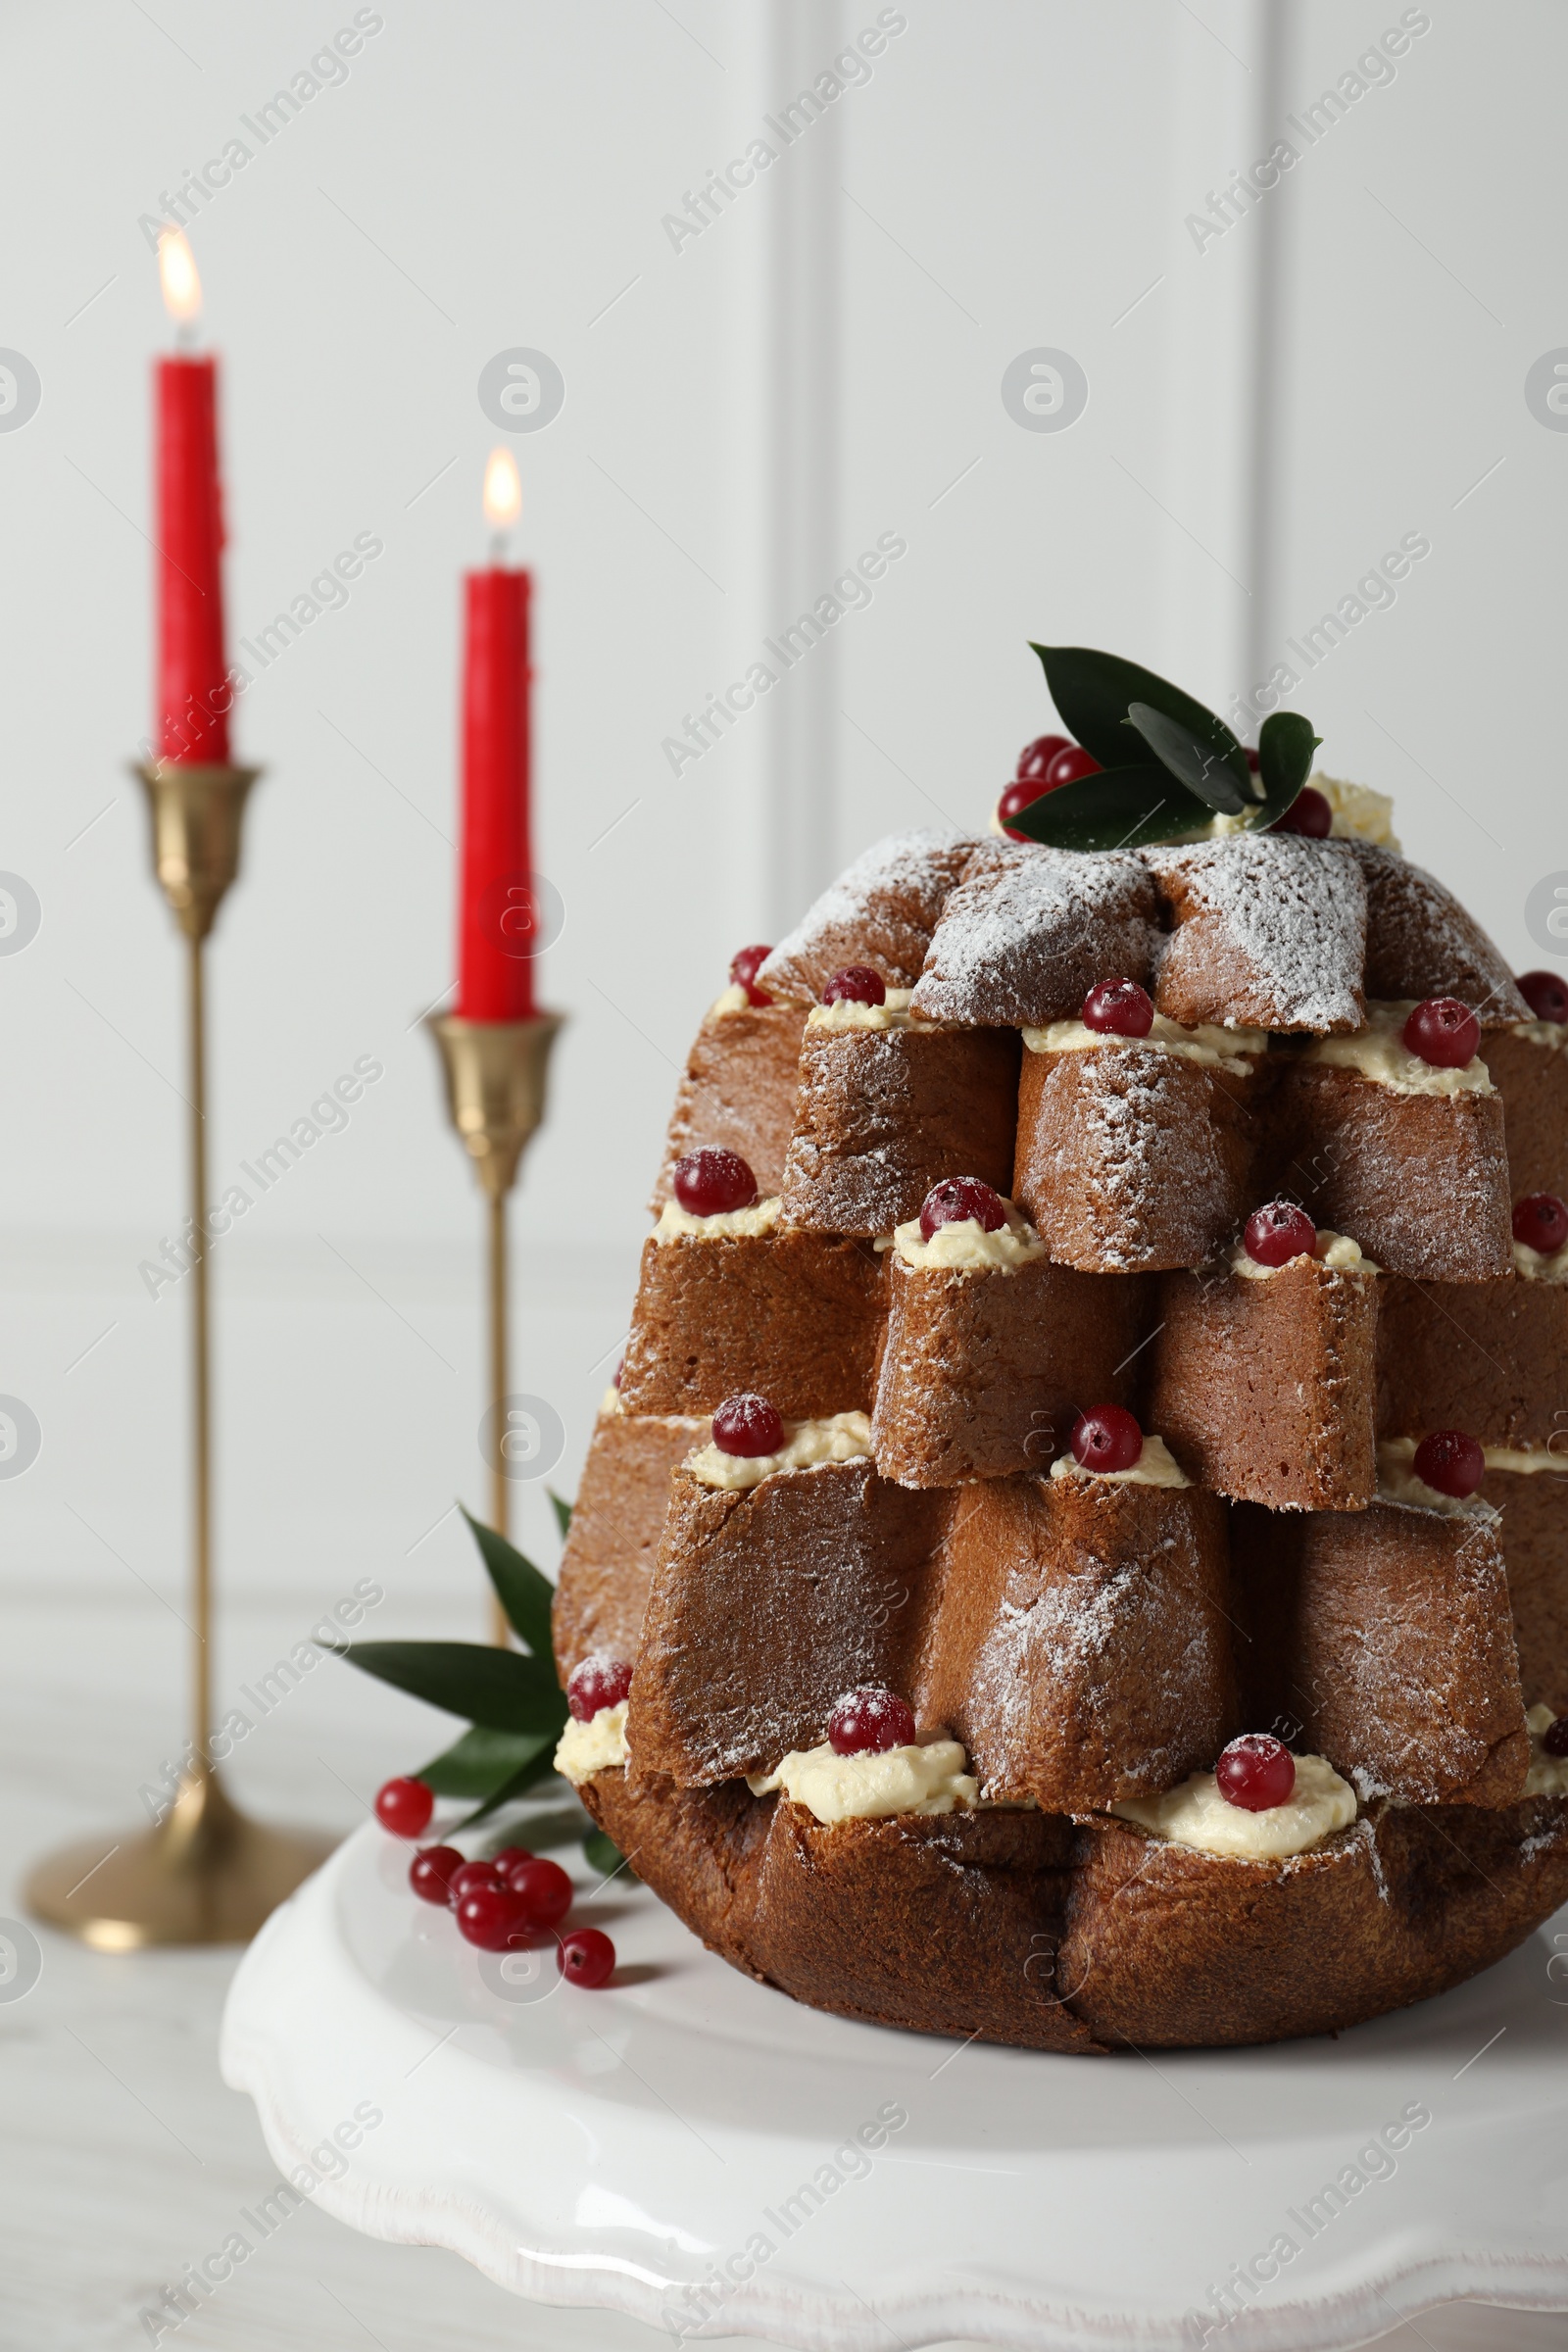 Photo of Delicious Pandoro Christmas tree cake with powdered sugar and berries near festive decor on white table